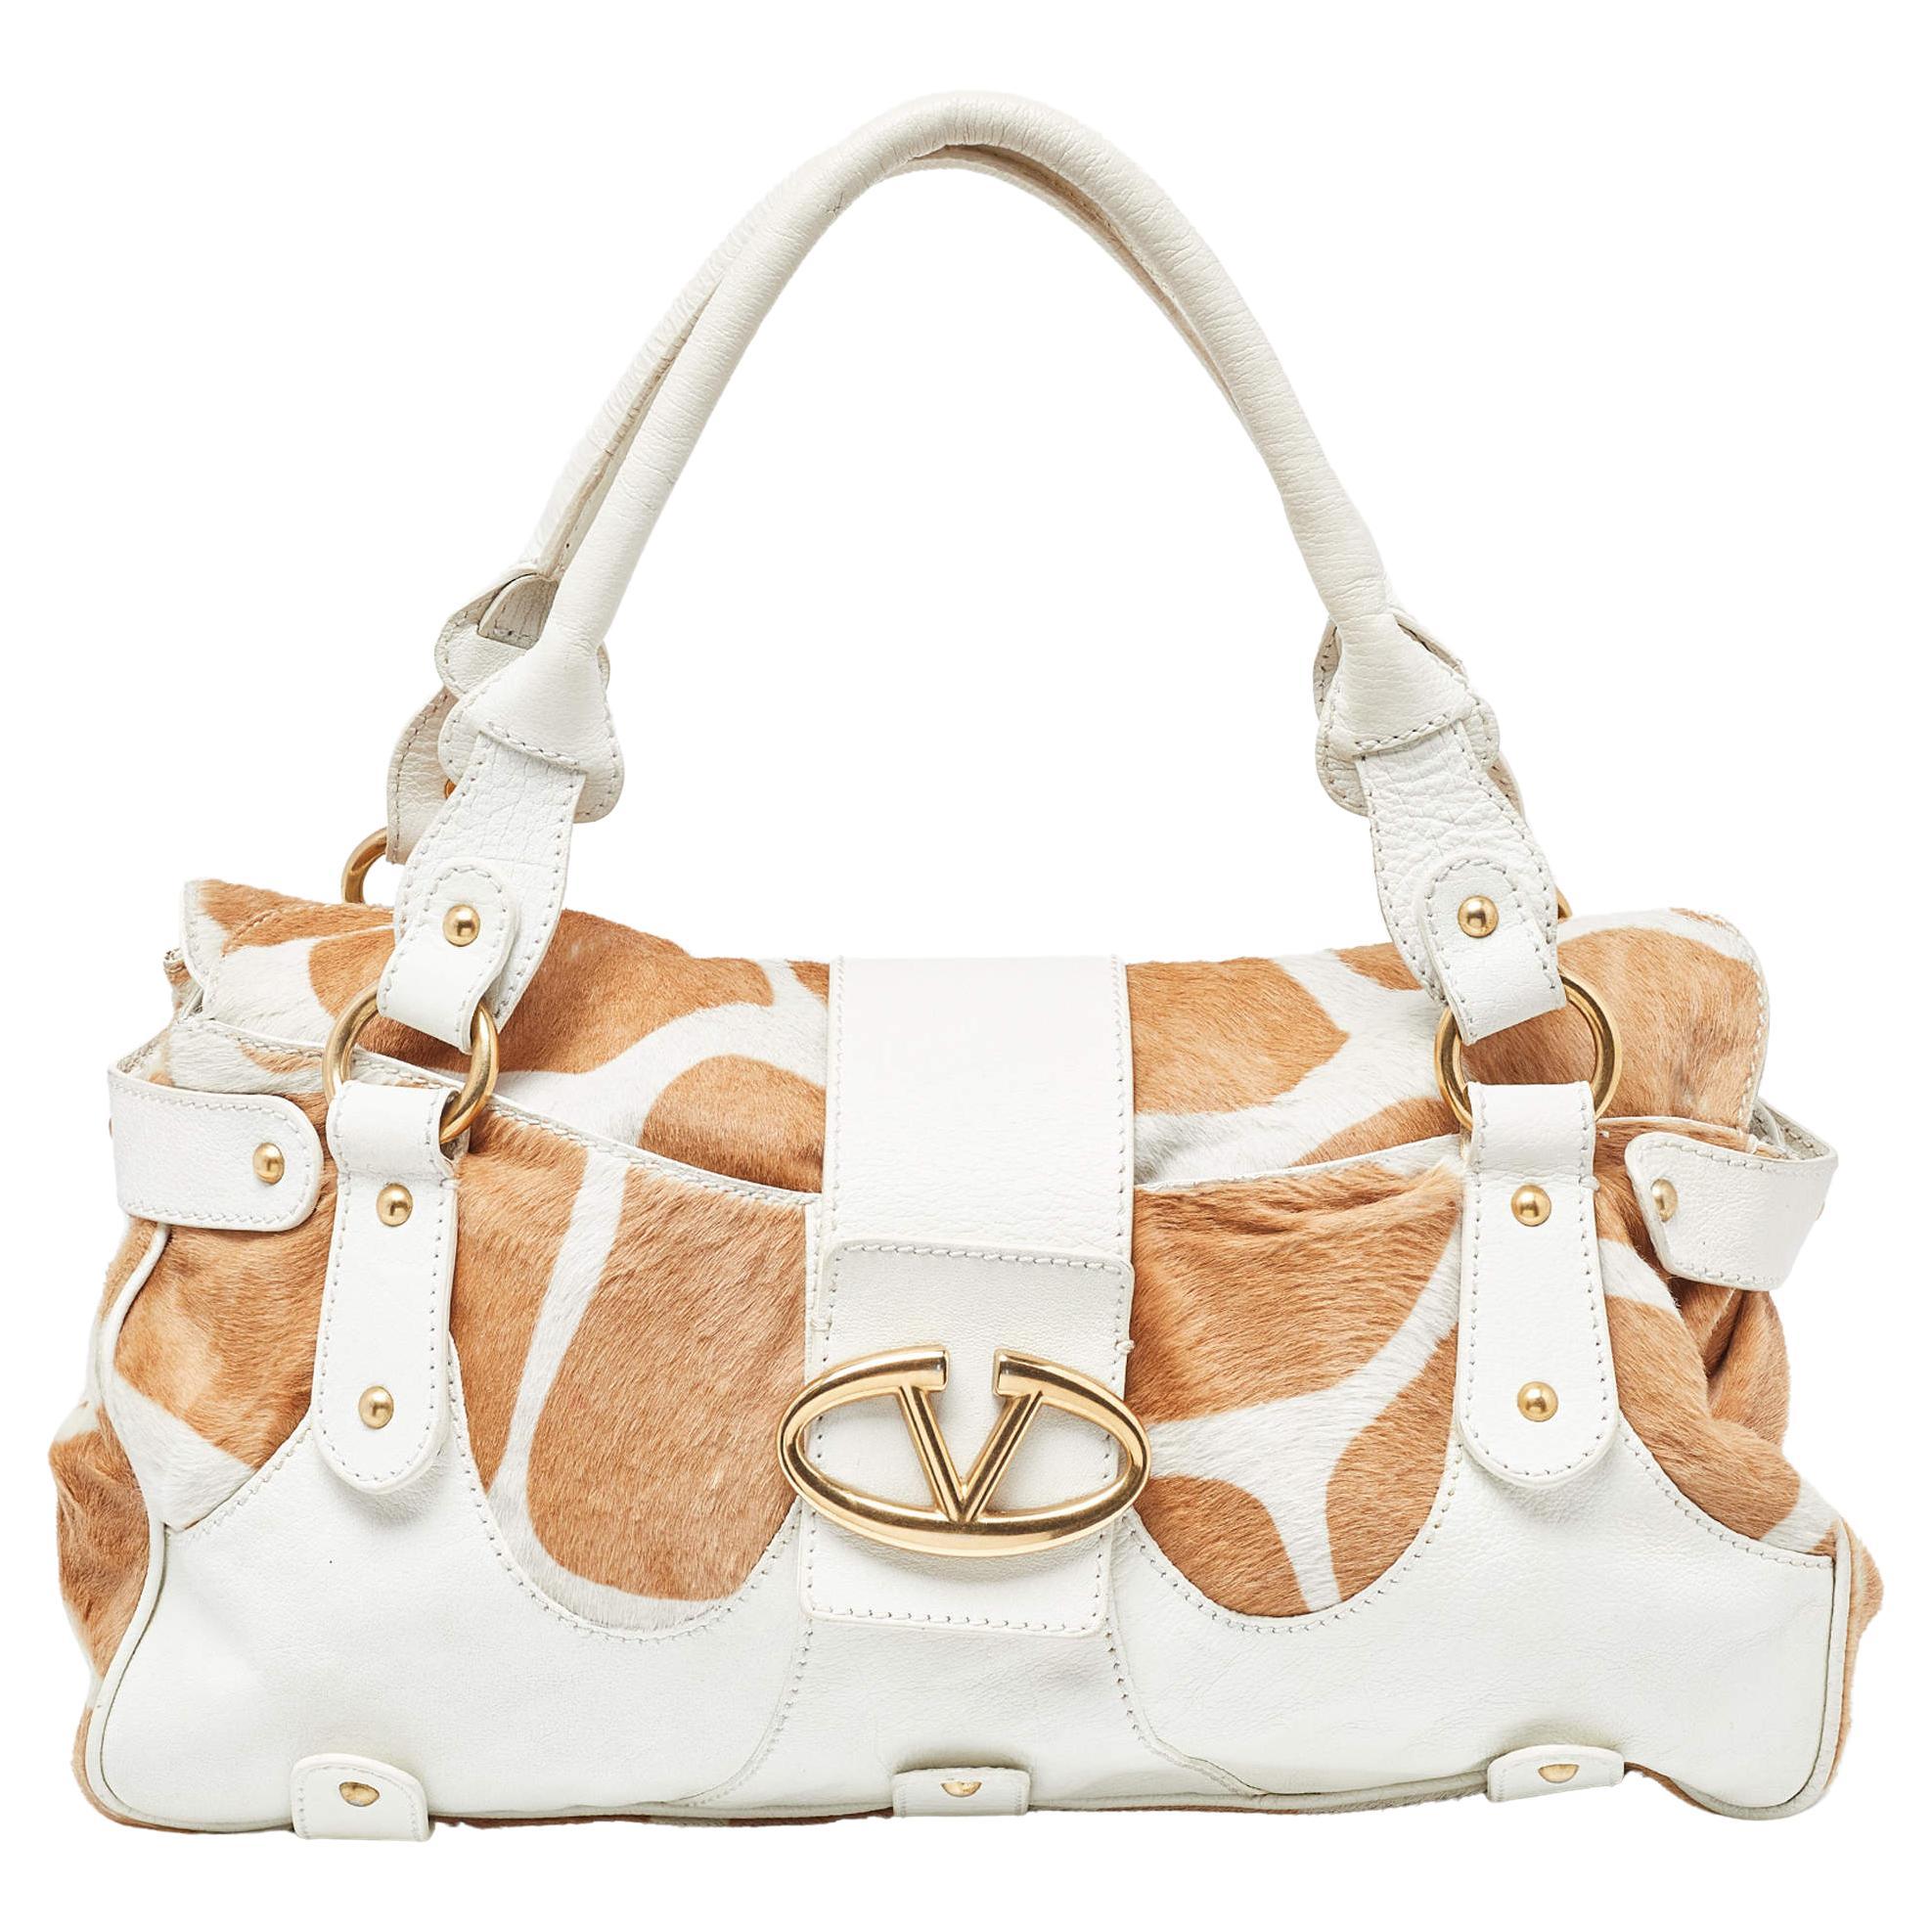 Valentino Beige/White Calfhair and Leather VLogo Satchel